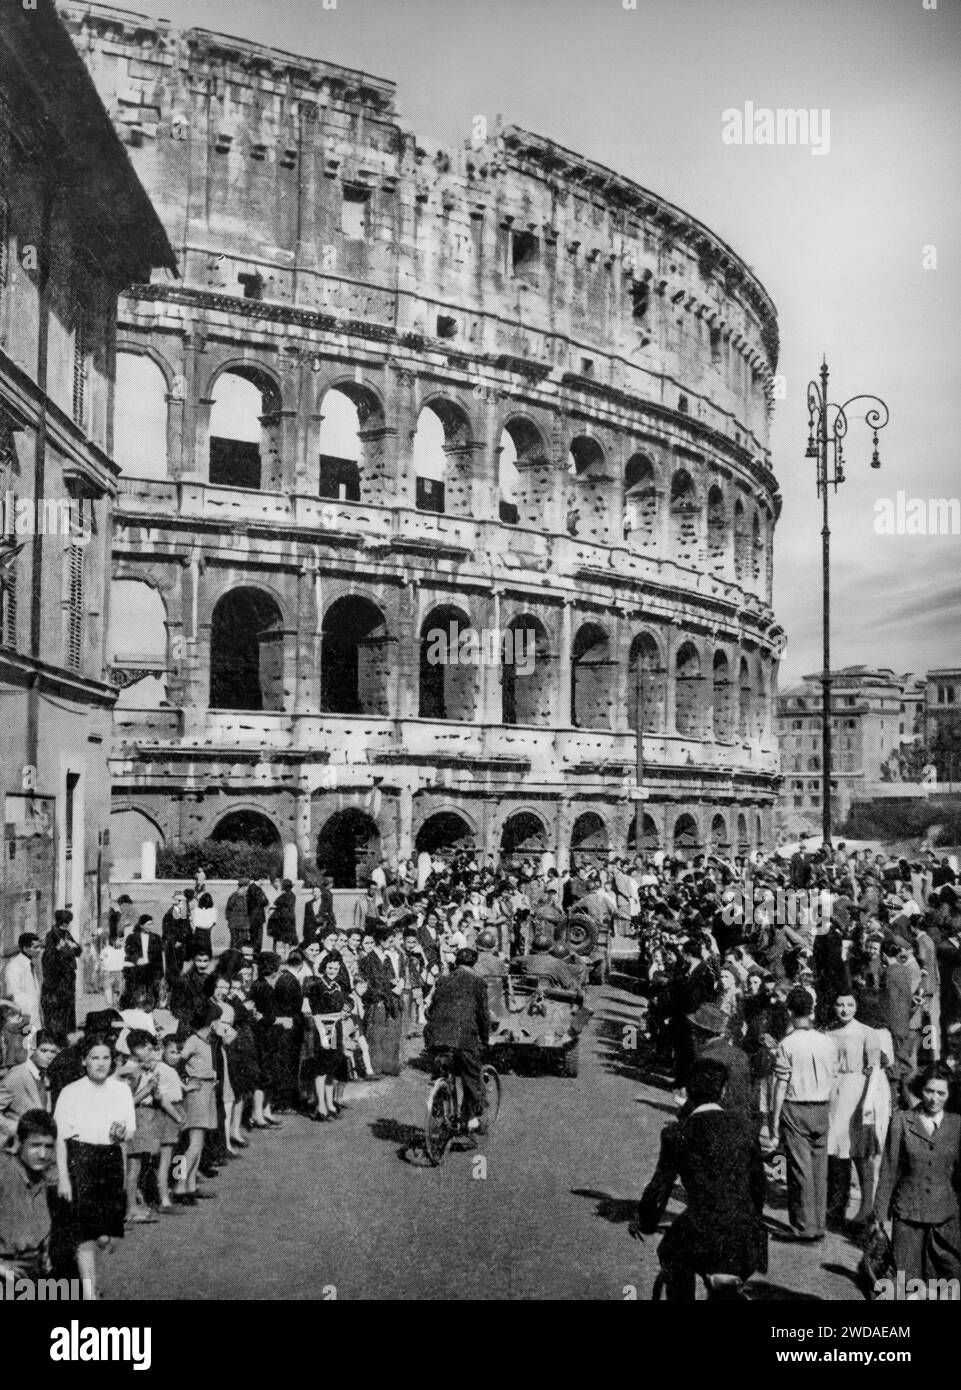 On the morning of 4th June 1944, American troops pass the Colliseum in Rome to the delight of the civilians. Followed by Allied tanks, by evening the city had been liberated. Stock Photo